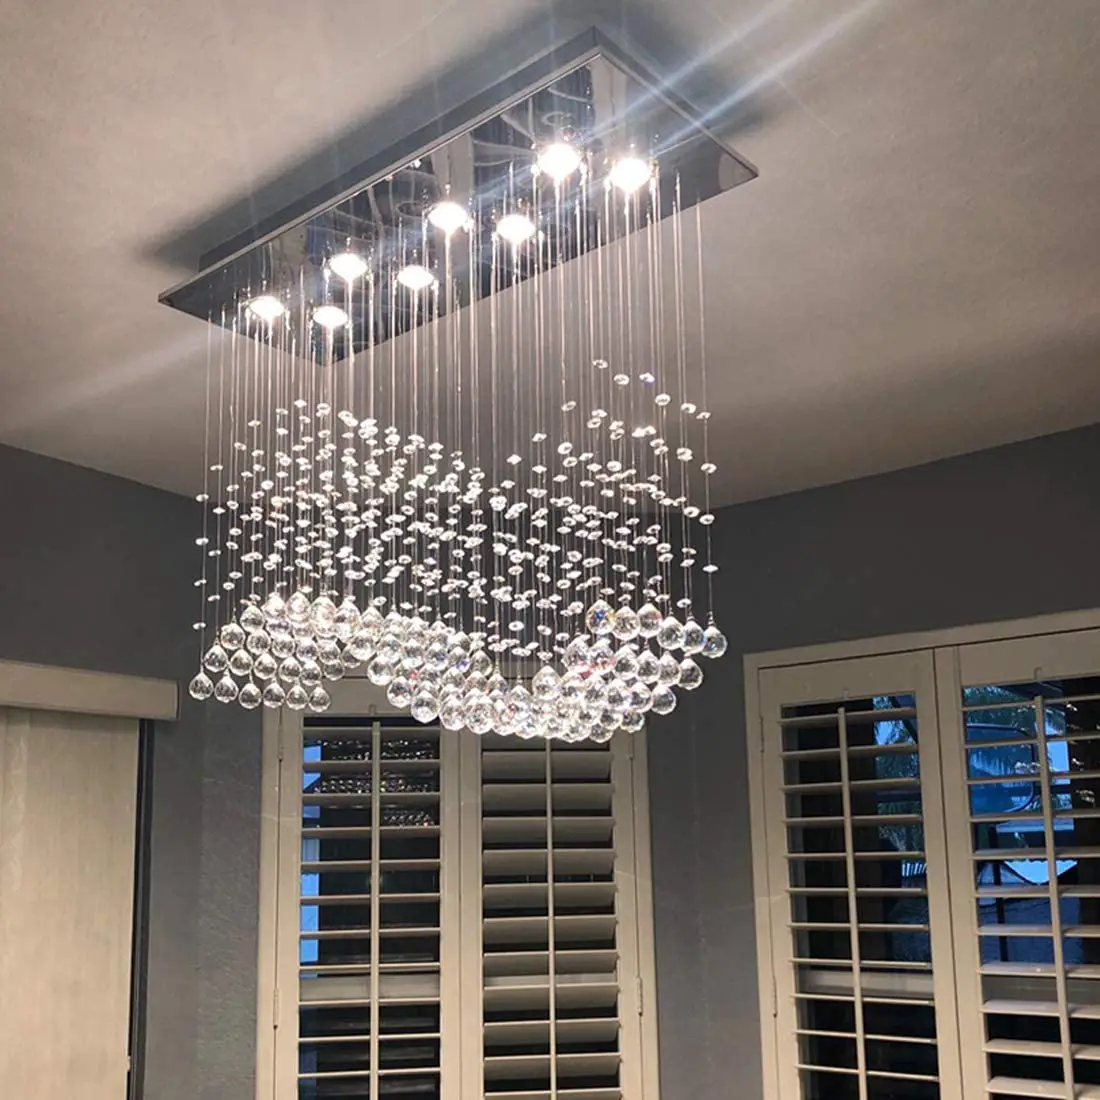 The 8 Best Modern Crystal Chandeliers for Dining Room - RatedLocks